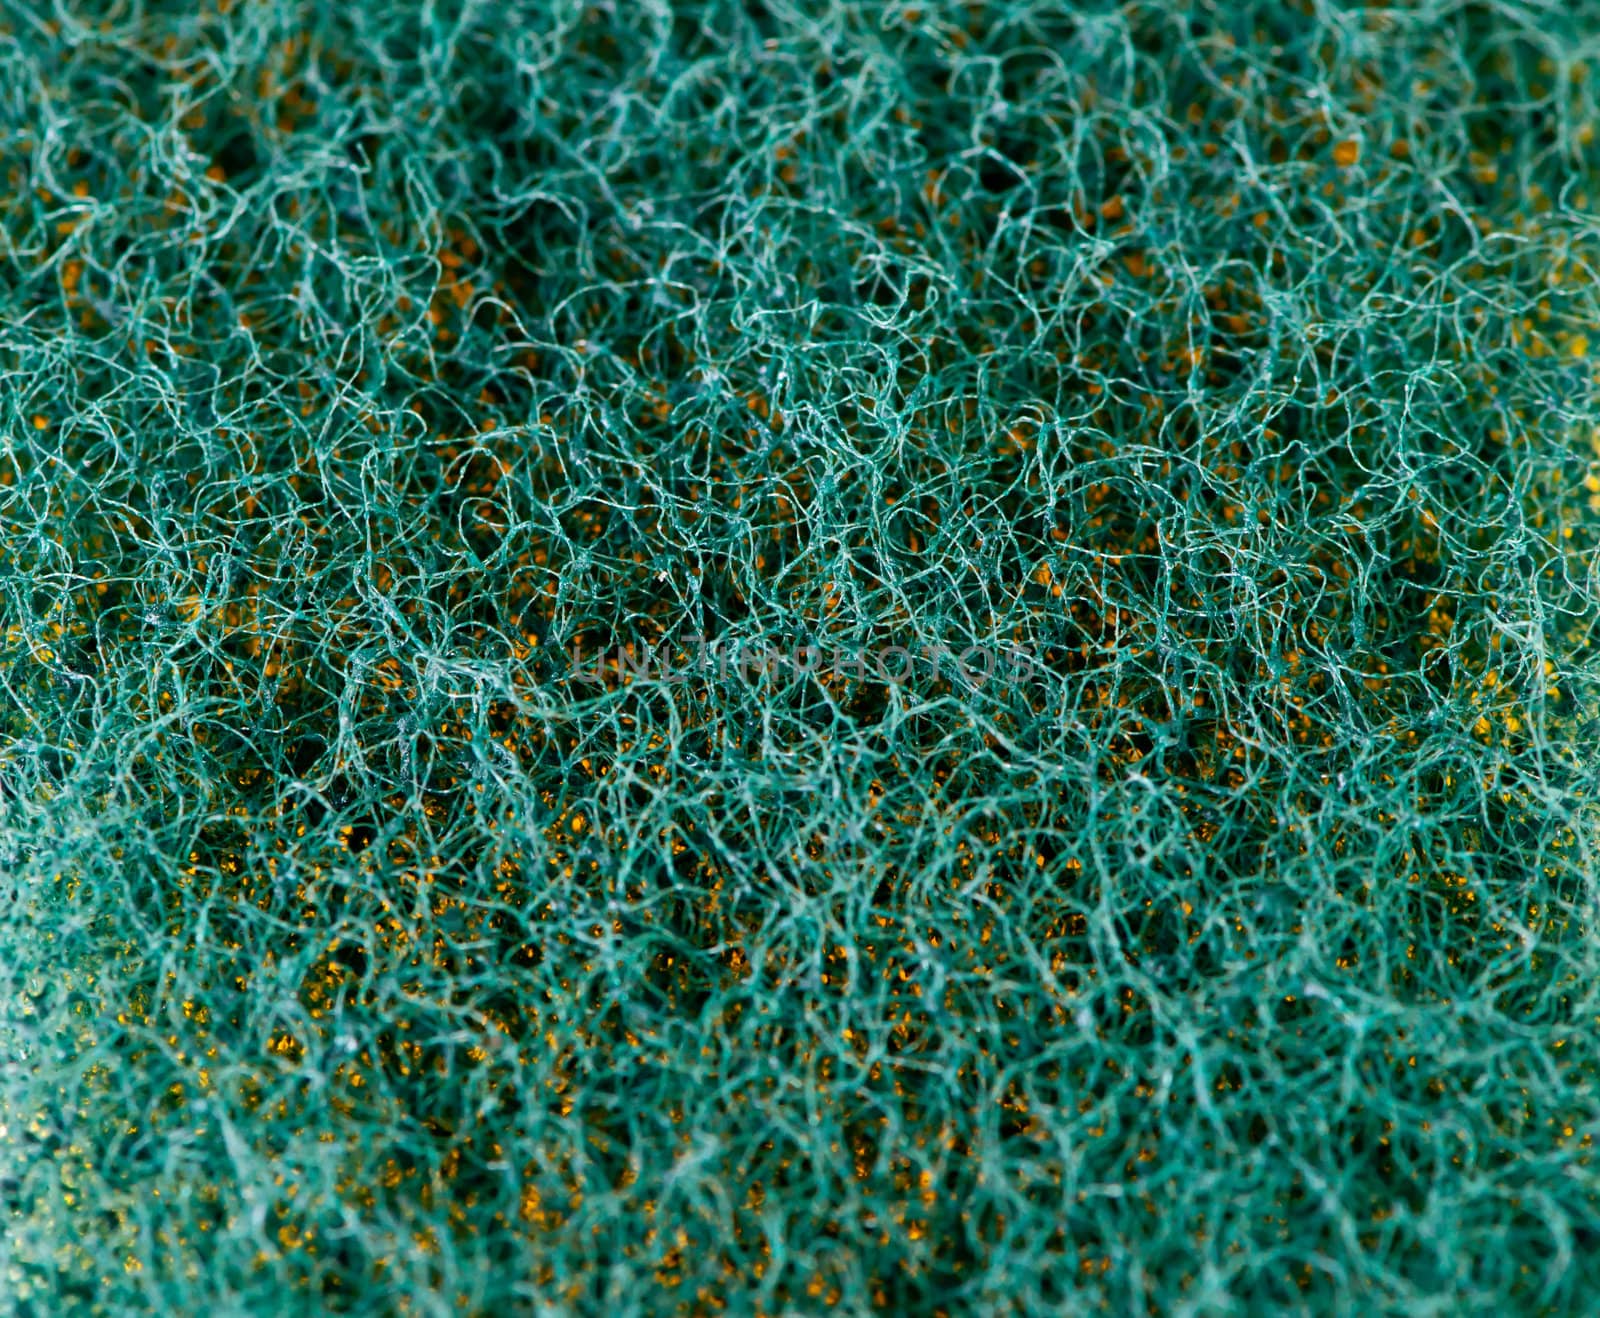 Close up view of pores of green sponge texture